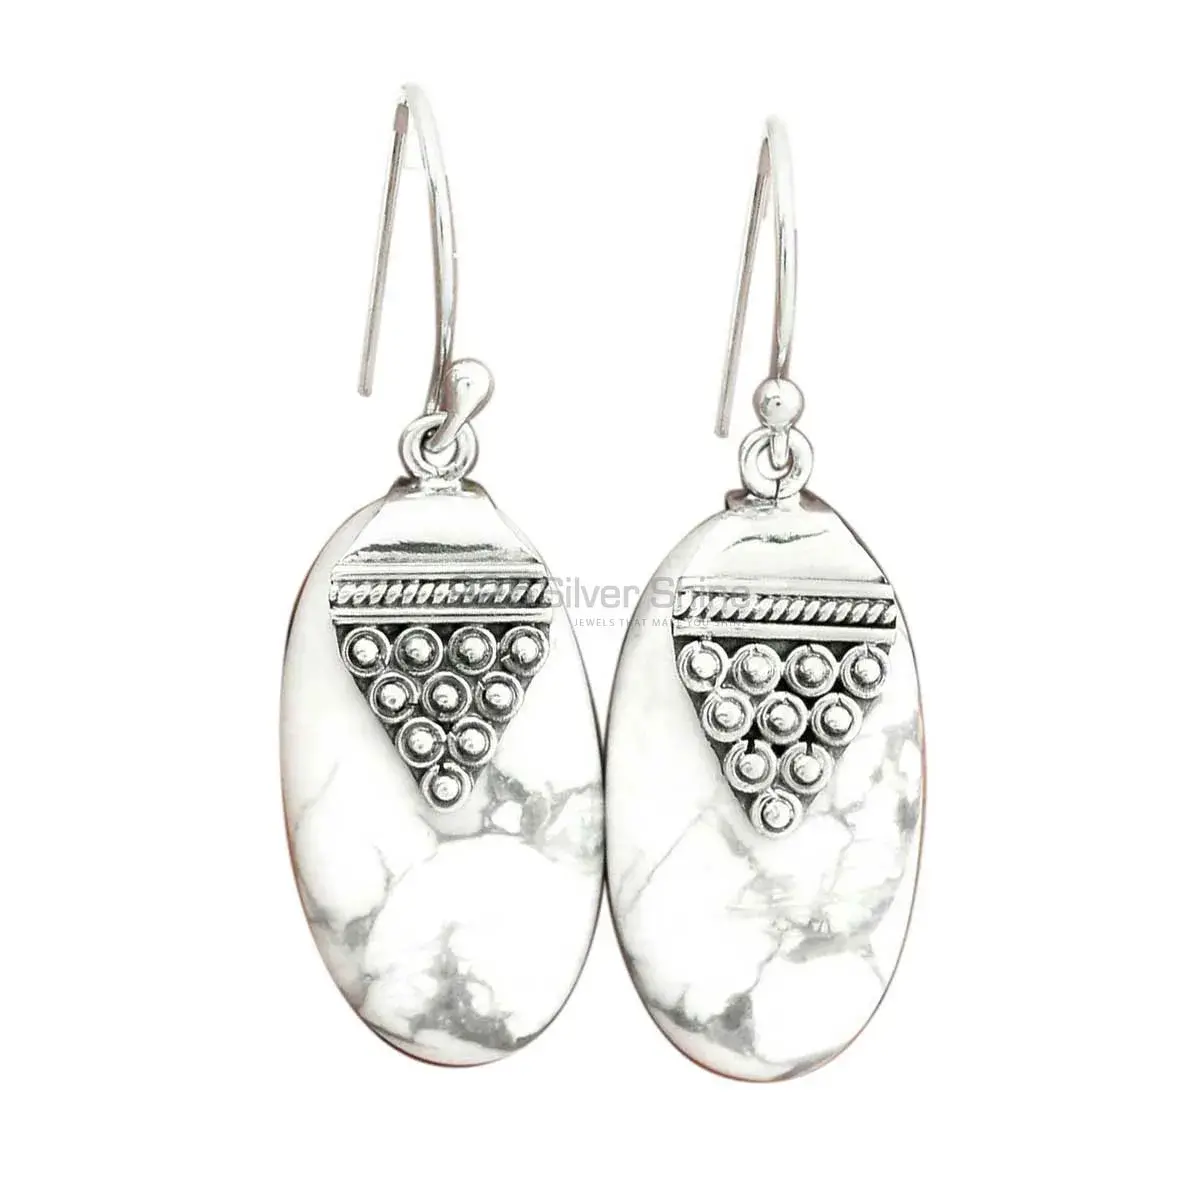 Inexpensive 925 Sterling Silver Earrings Wholesaler In Dendritic Agate Gemstone Jewelry 925SE2475